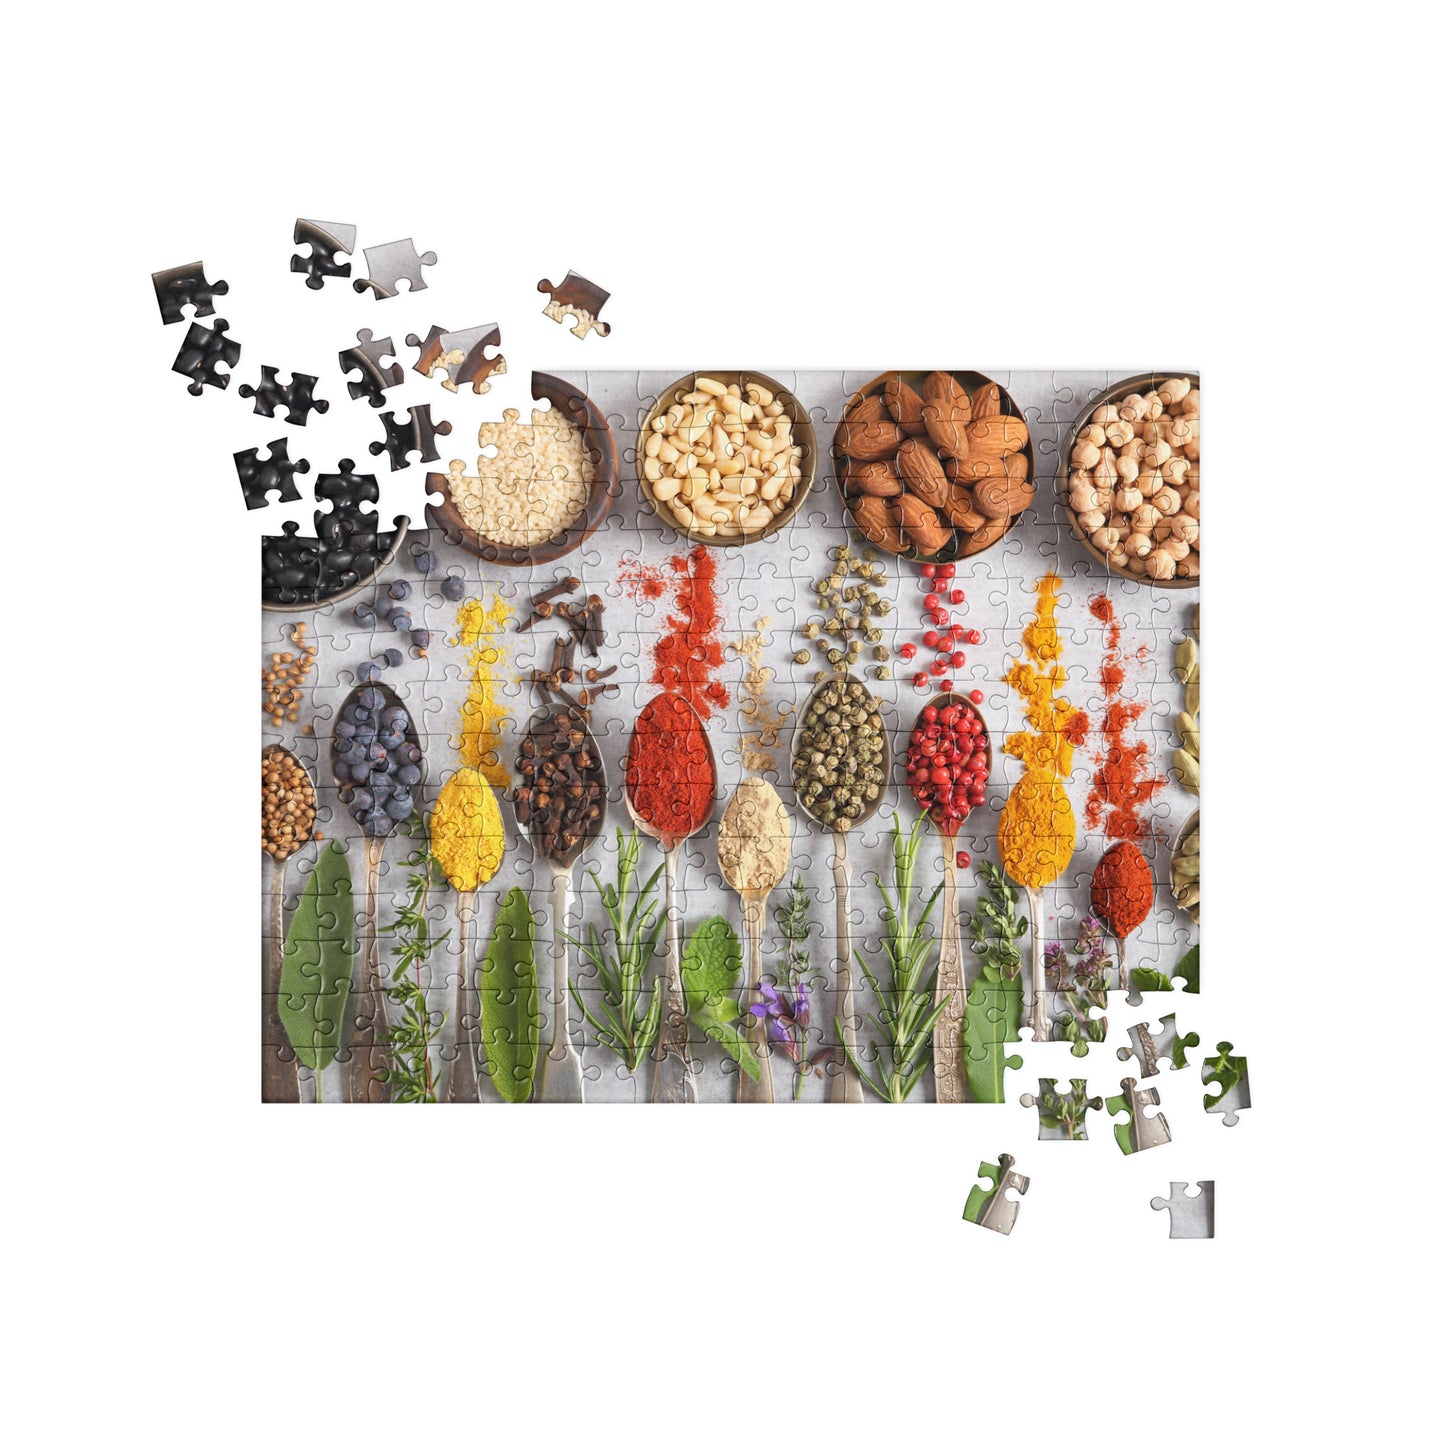 Herb Garden Jigsaw puzzle: Herbs, Spices, Nuts, Legumes